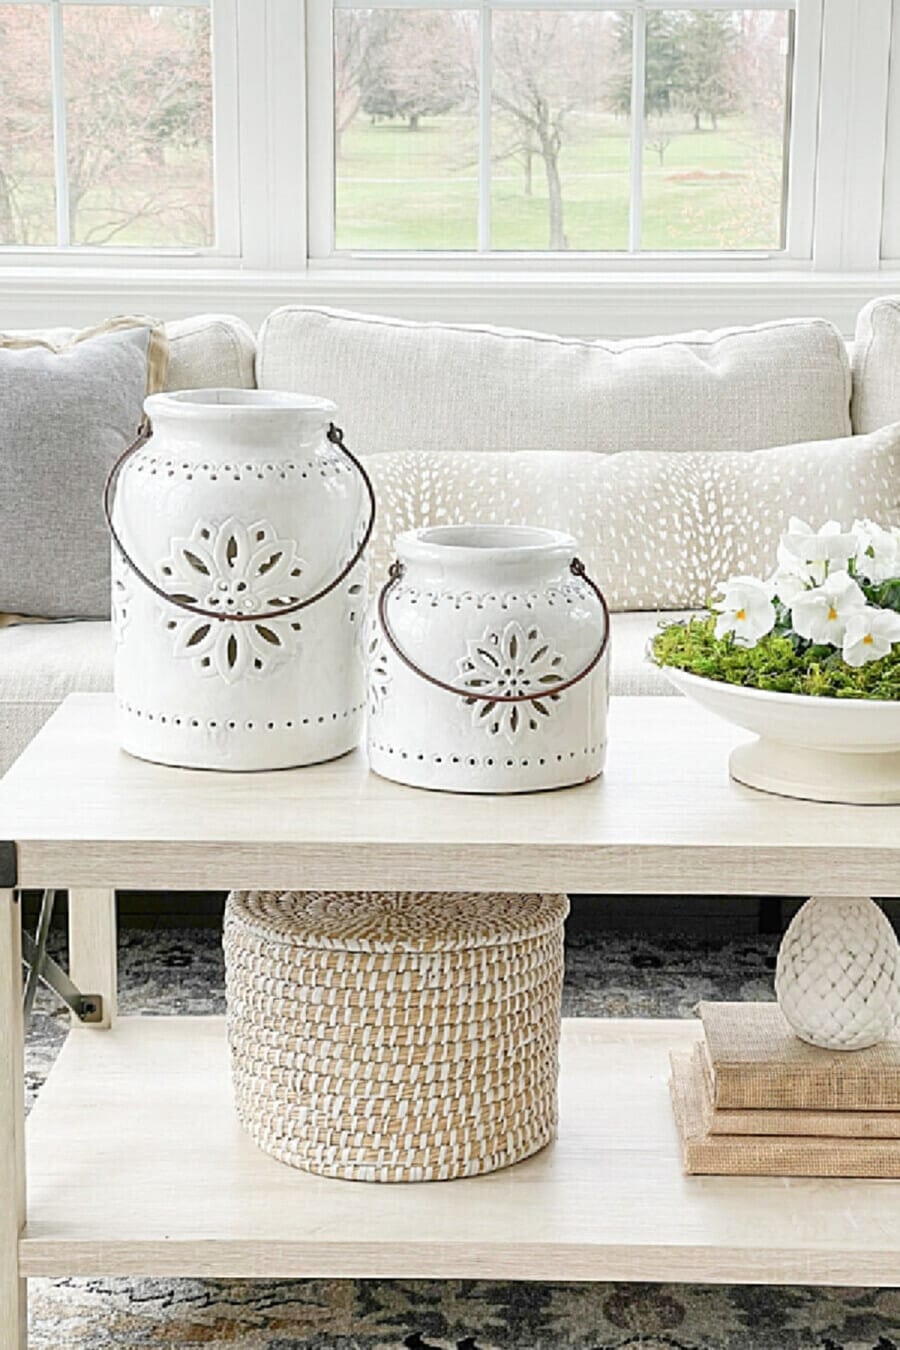 How To Decorate With Baskets: Stylish And Useful Ideas